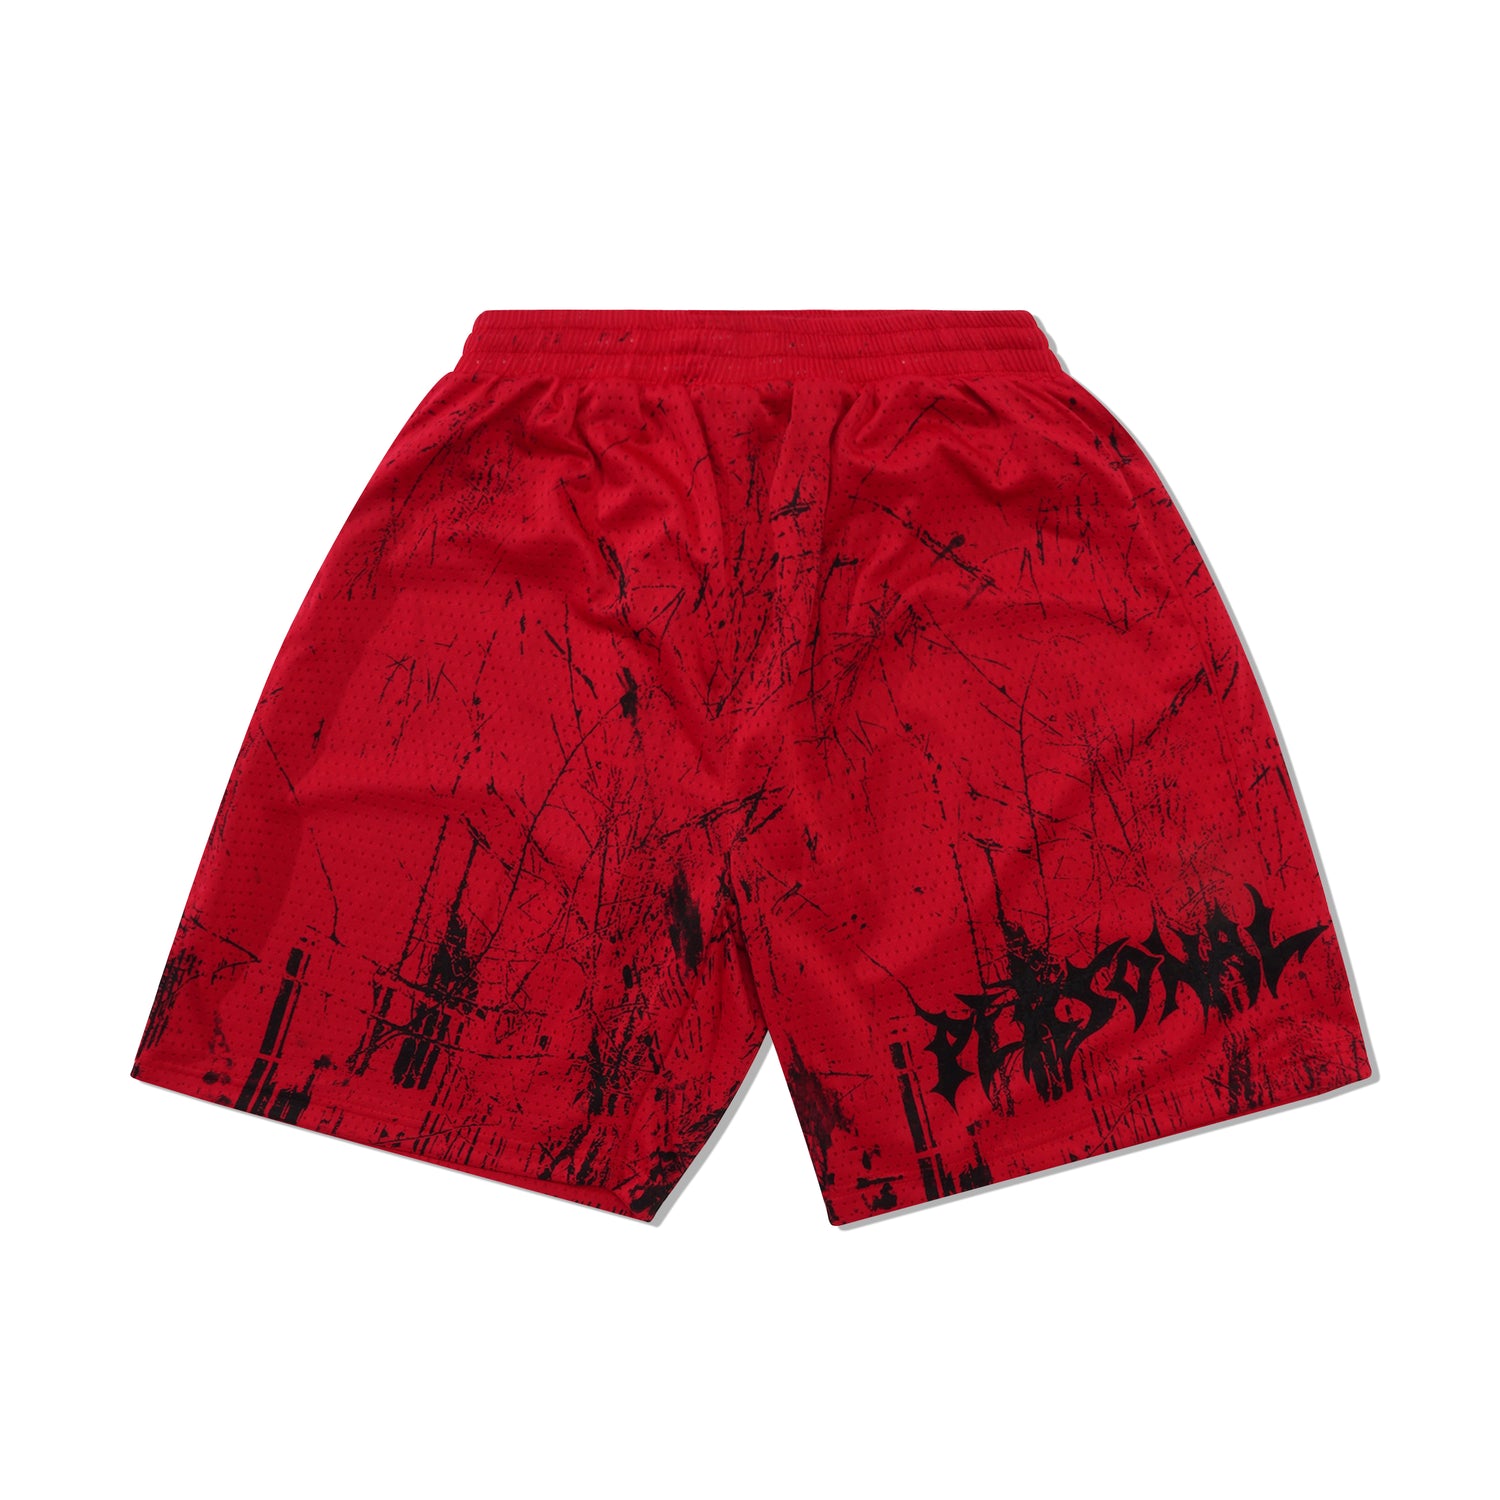 Grave Tree Camo Basketball Shorts, Red